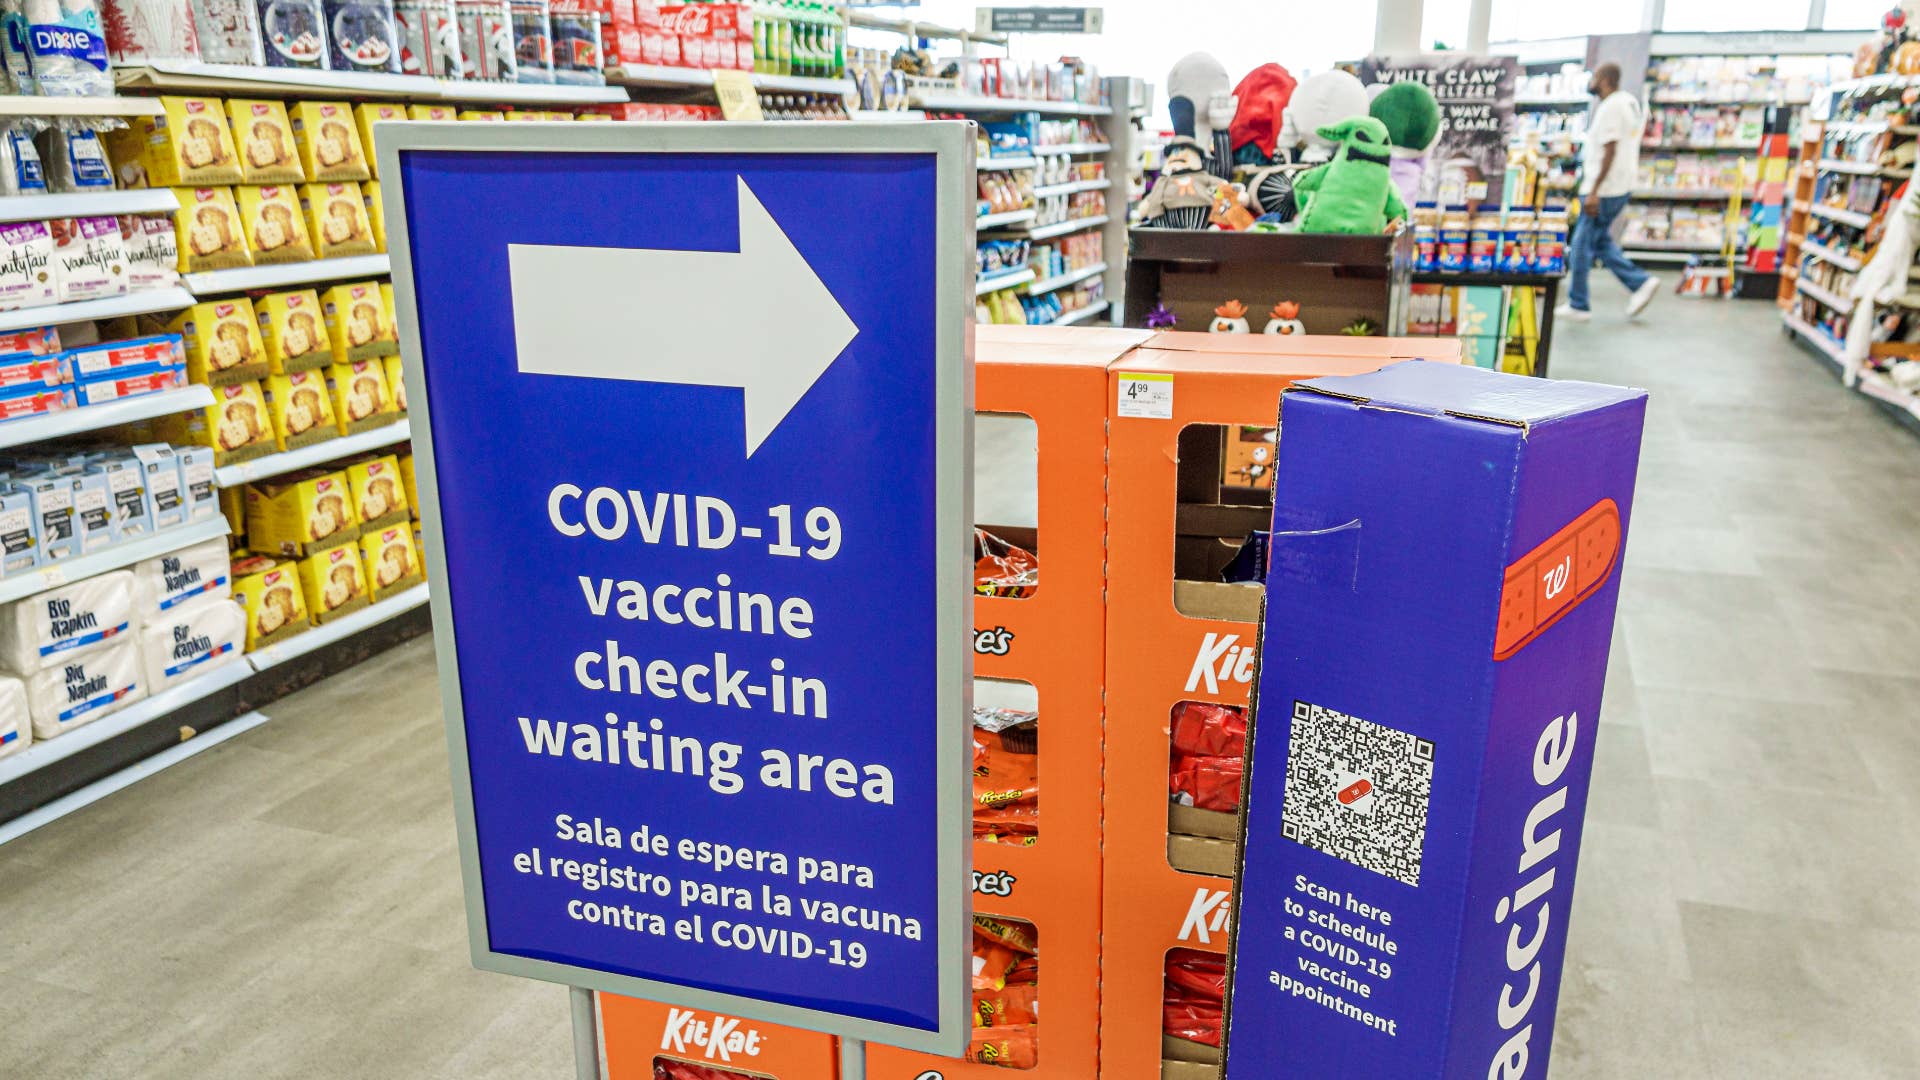 A COVID vaccine sign is seen in a store